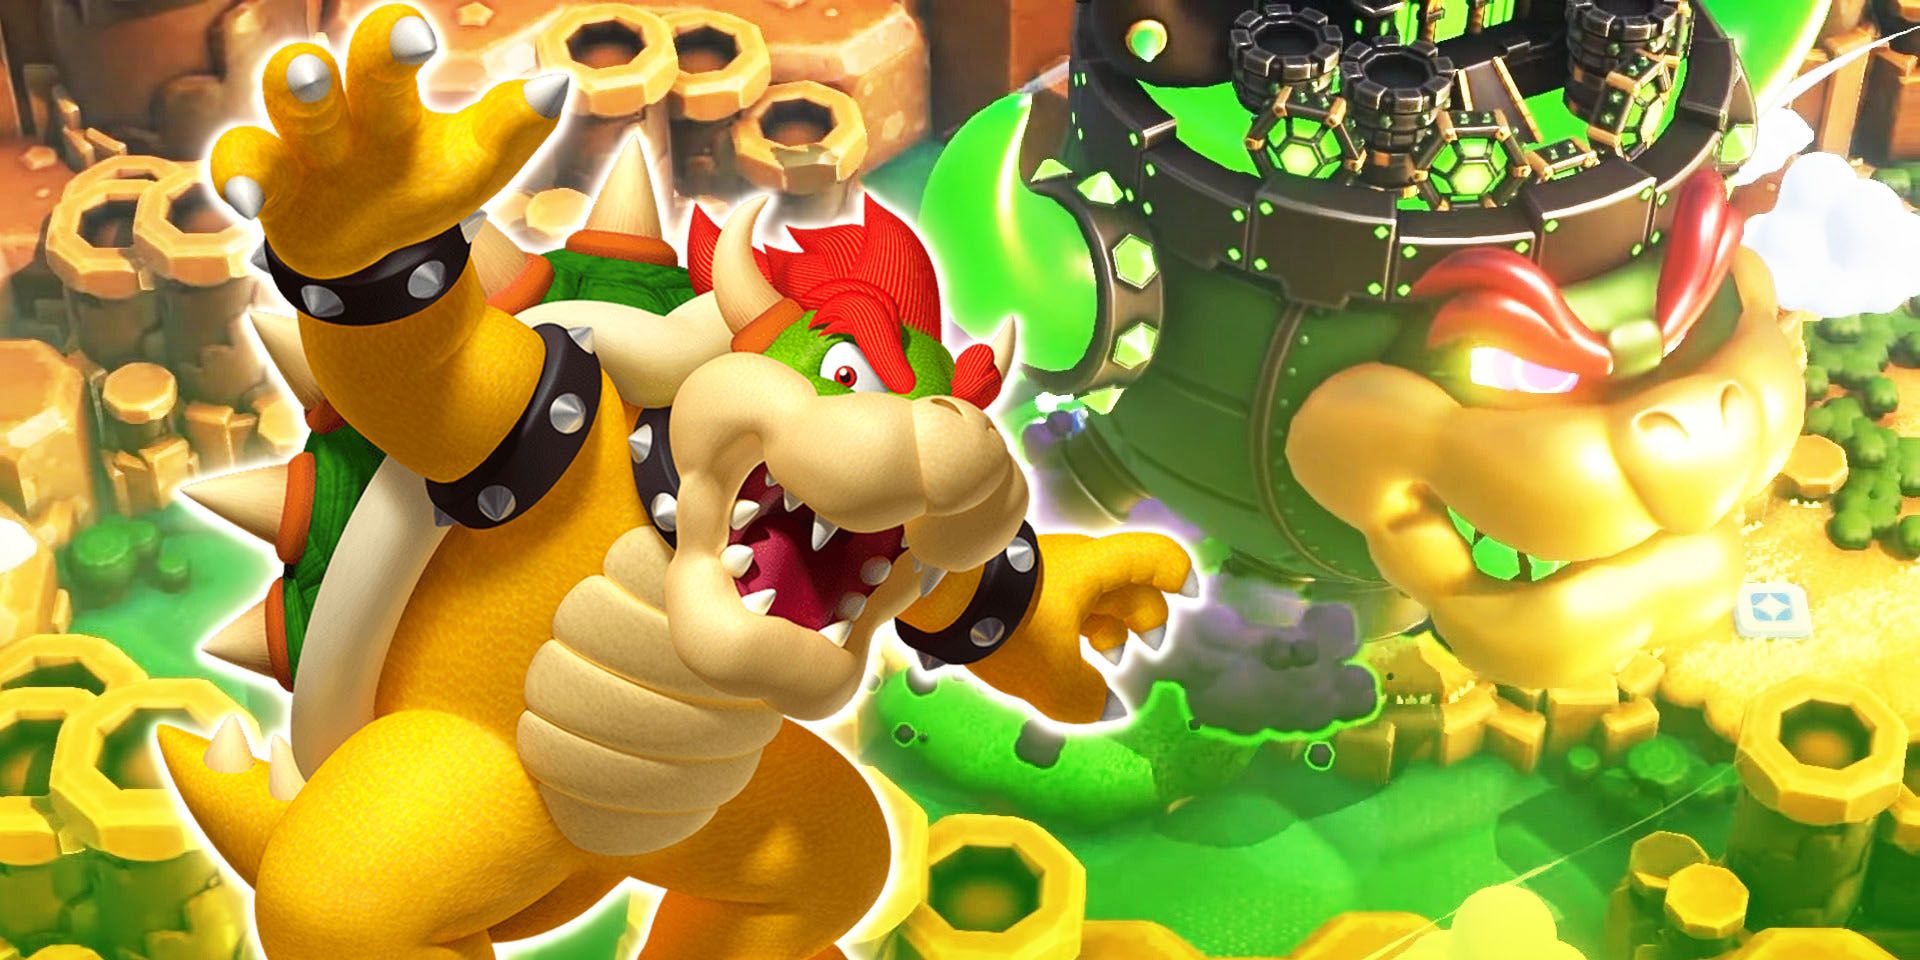 Bowser in front of green and yellow landscapes in Super Mario Bros. Wonder.